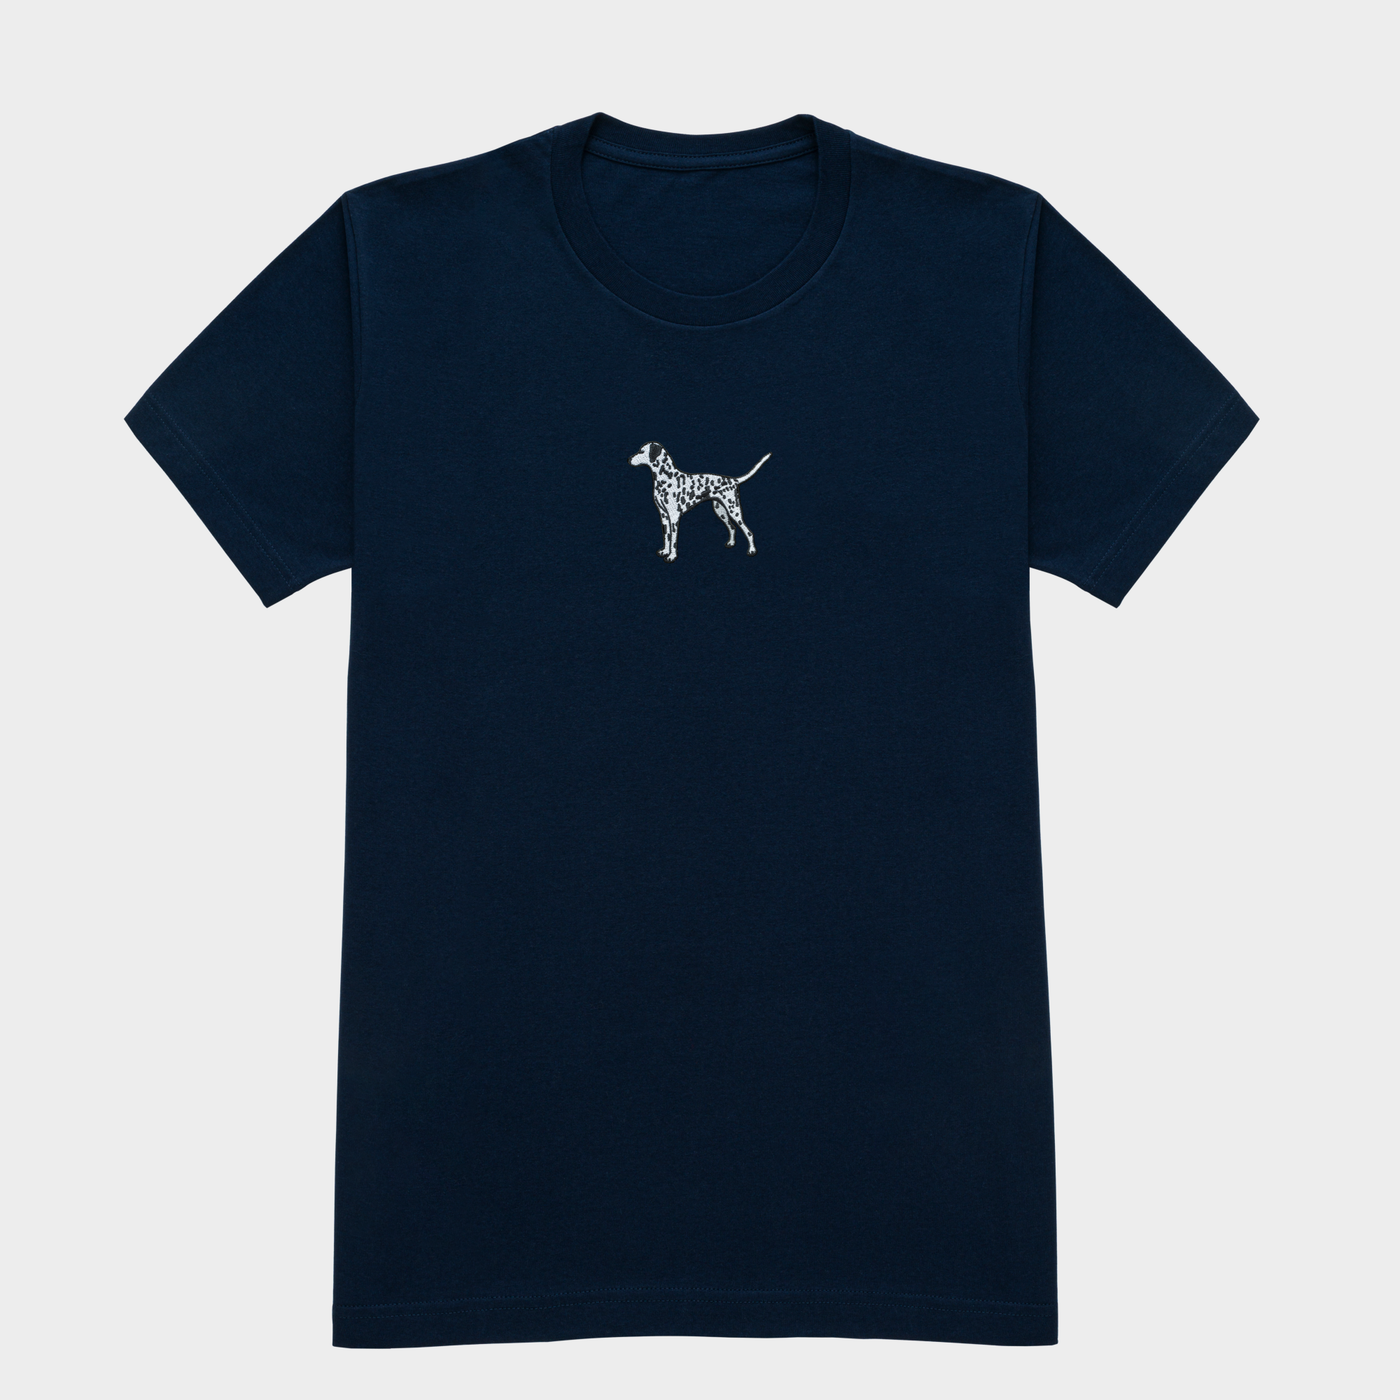 Bobby's Planet Women's Embroidered Dalmatian T-Shirt from Paws Dog Cat Animals Collection in Navy Color#color_navy